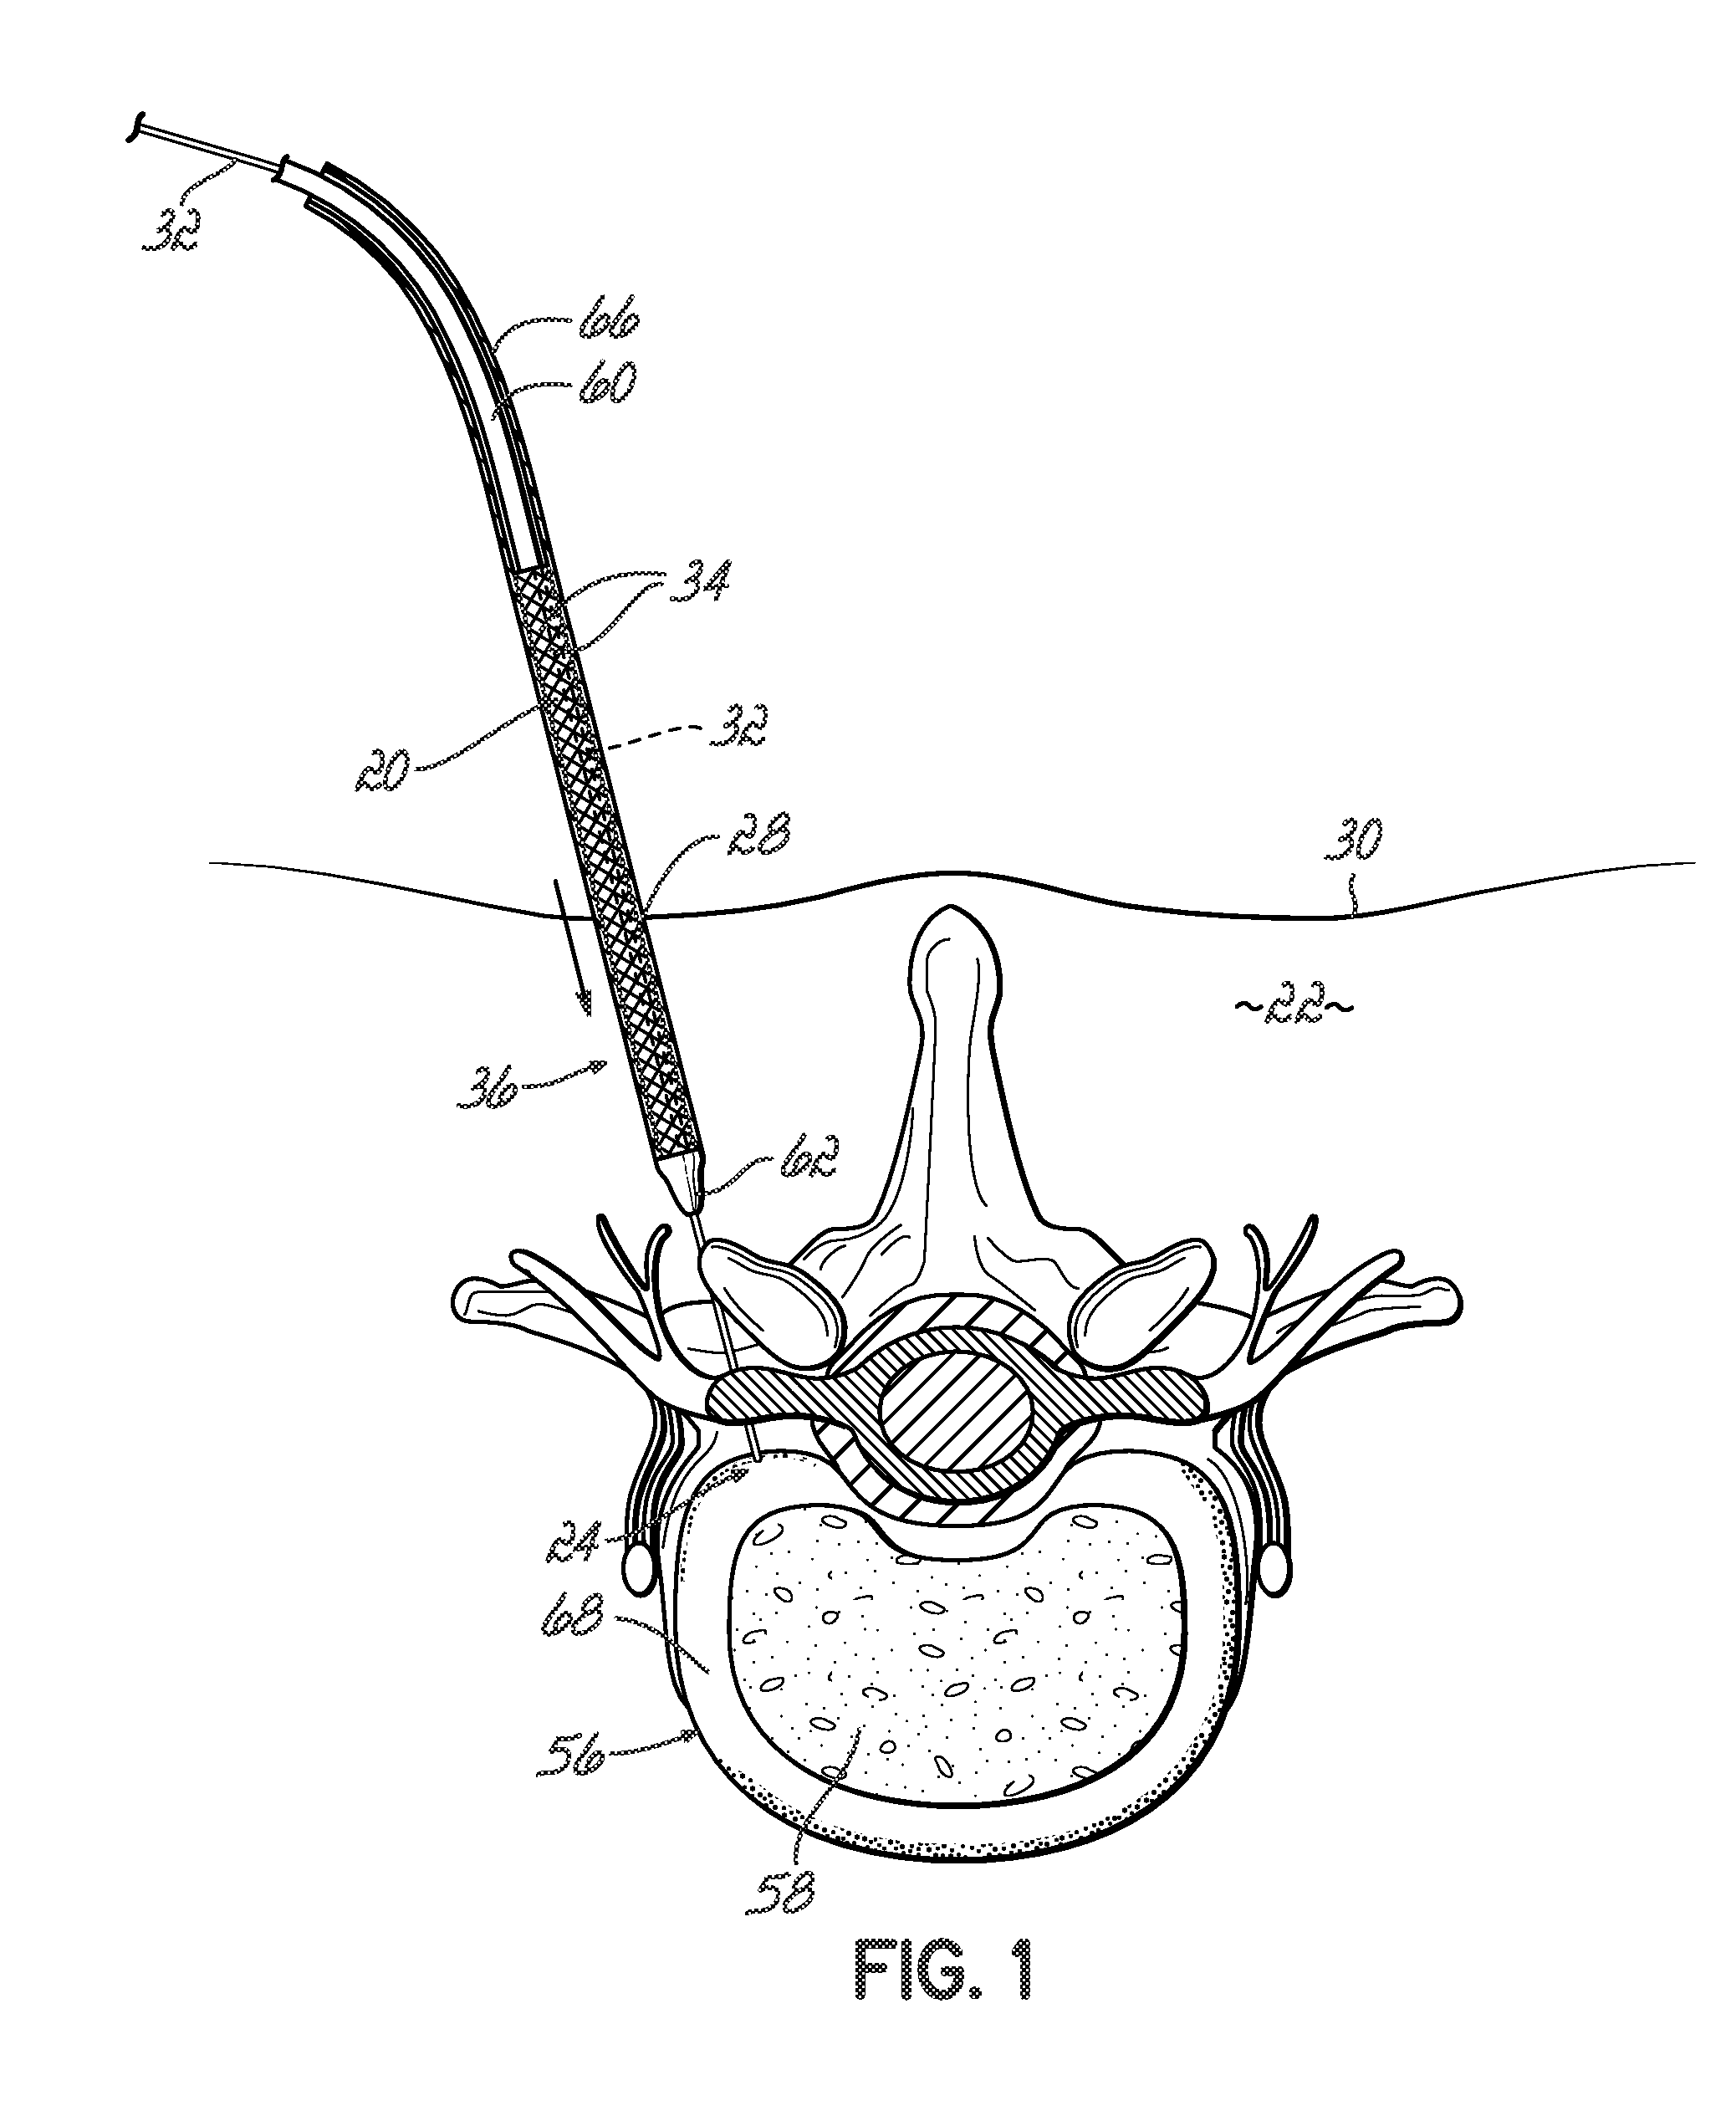 Surgical site access system and deployment device for same